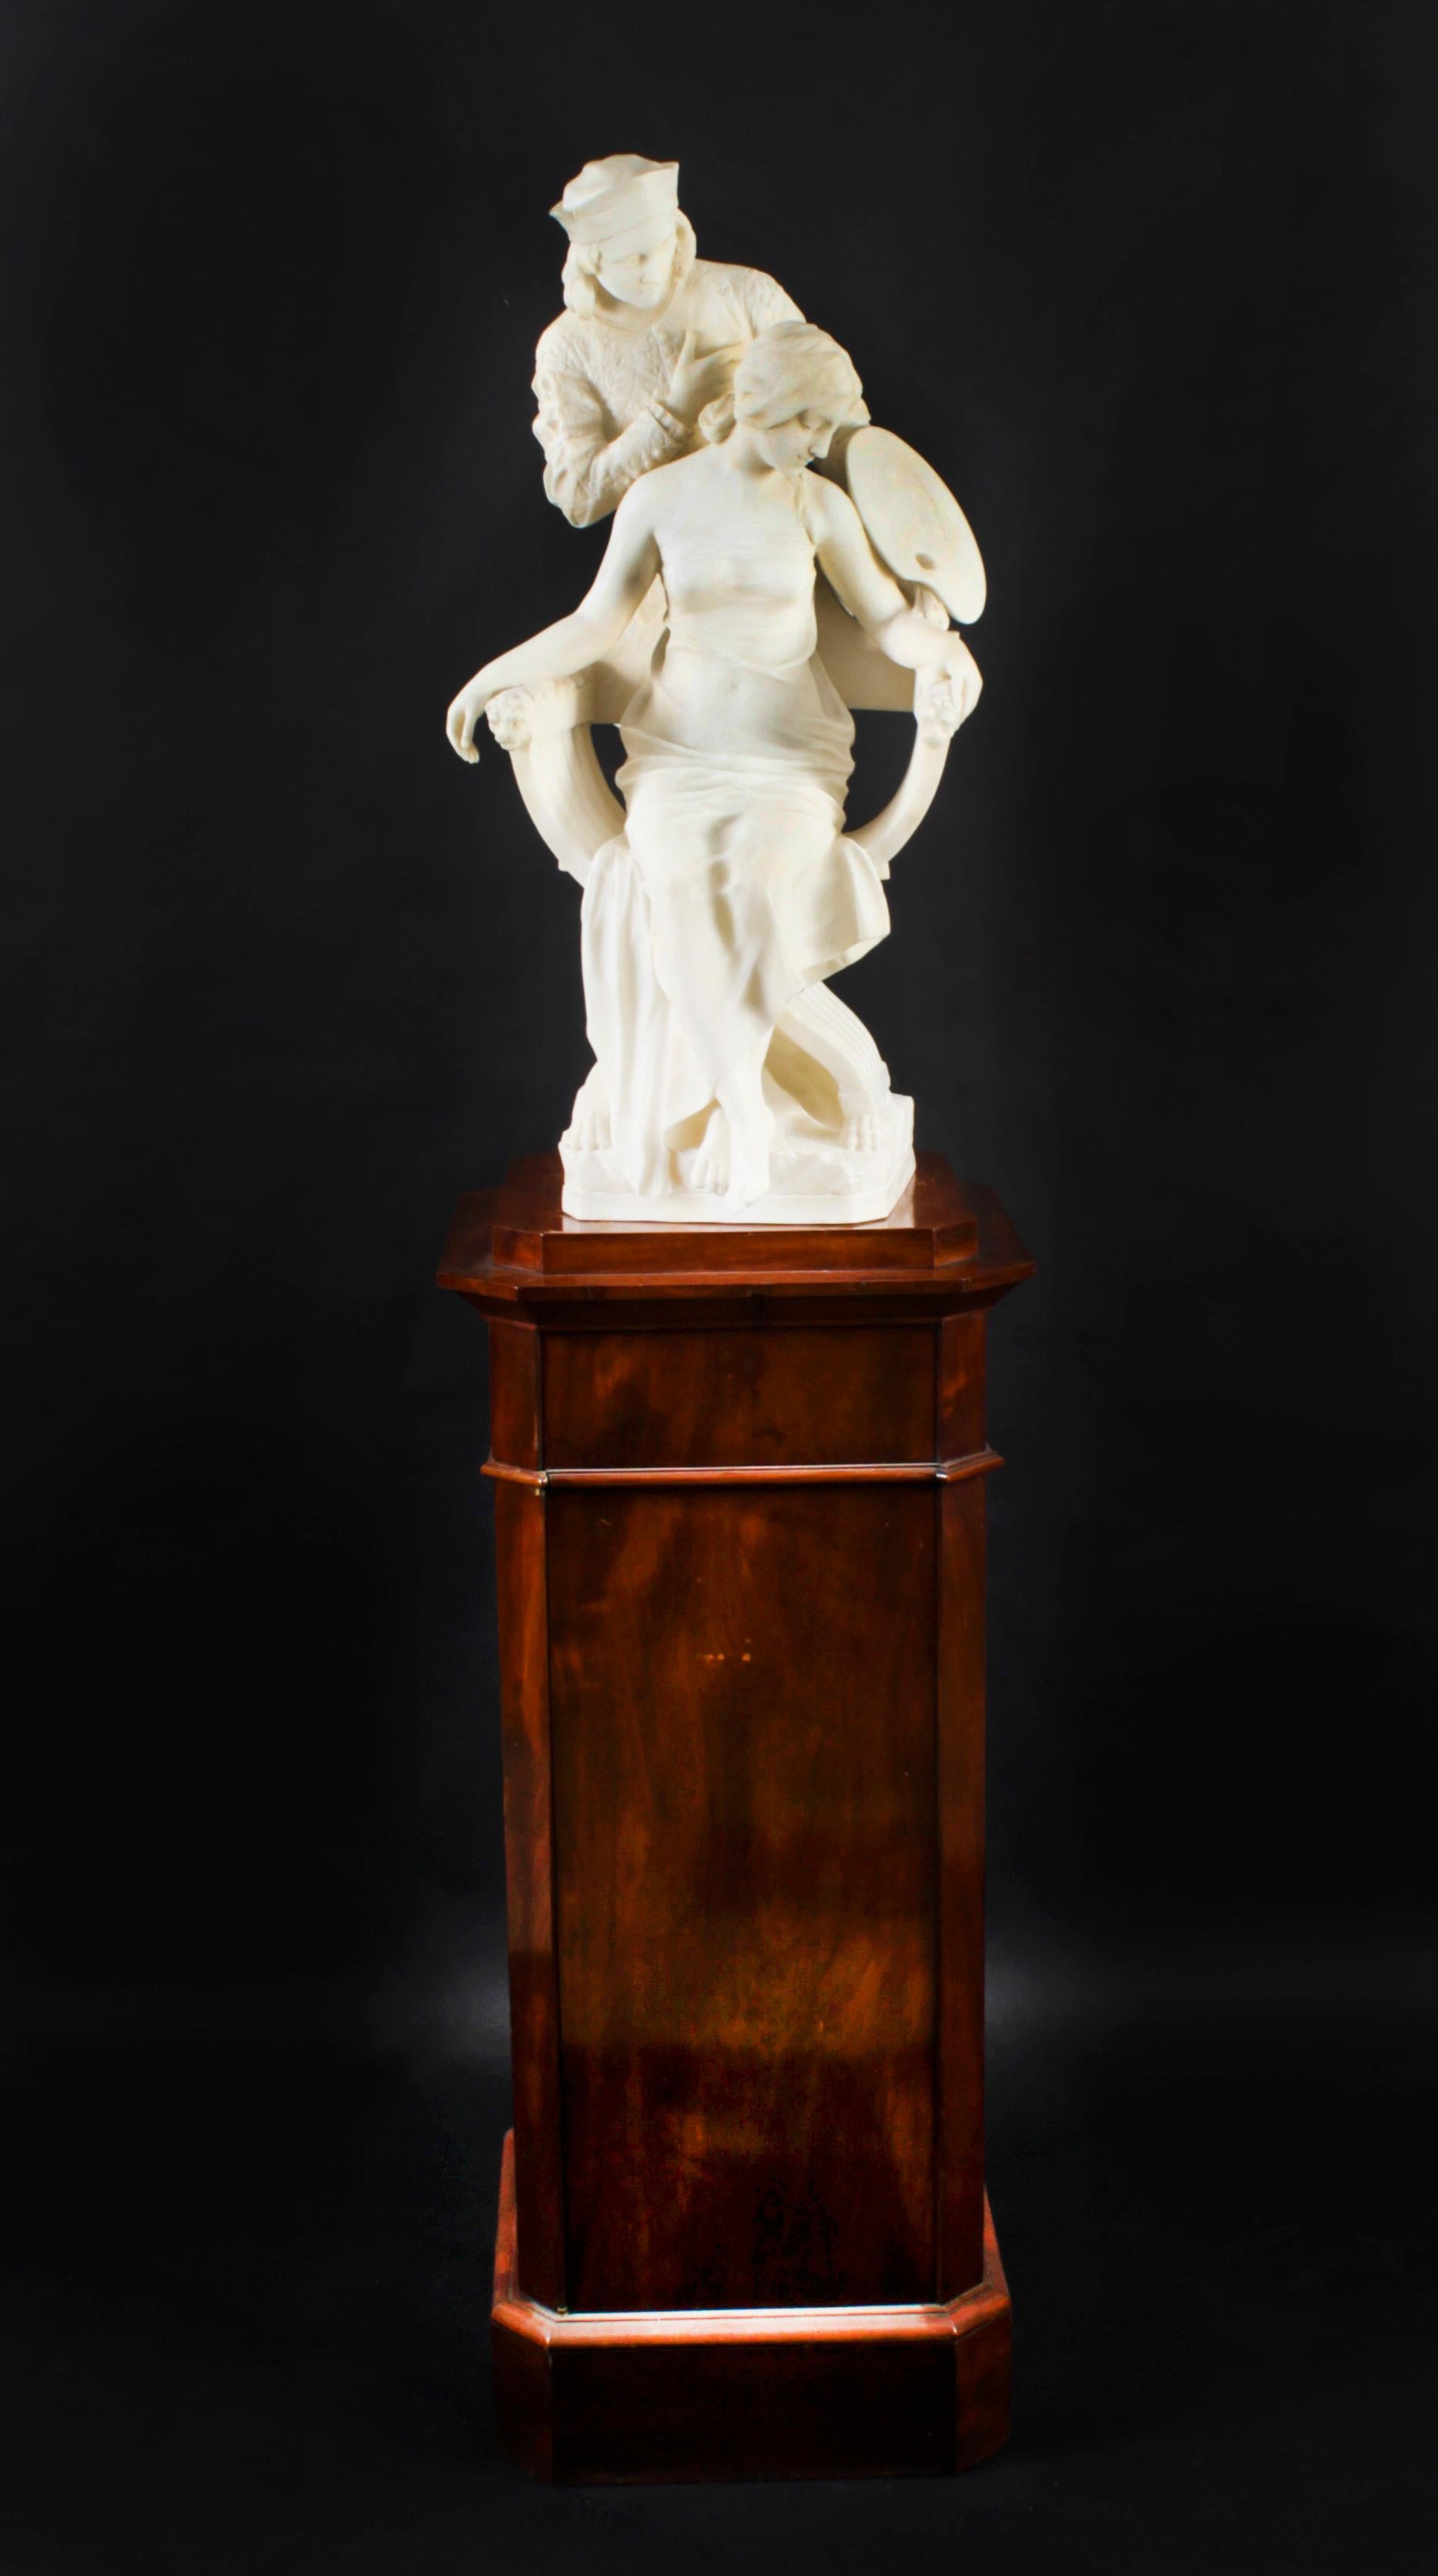 This is a splendid antique Italian carved alabaster sculpture of a figural group titled 'The Artist's Muse' by P. Emilio Fiaschi (Italian, 1858-1941), circa 1890 in date. 

This finely carved sculpture depicts a beautiful young couple modelled as a